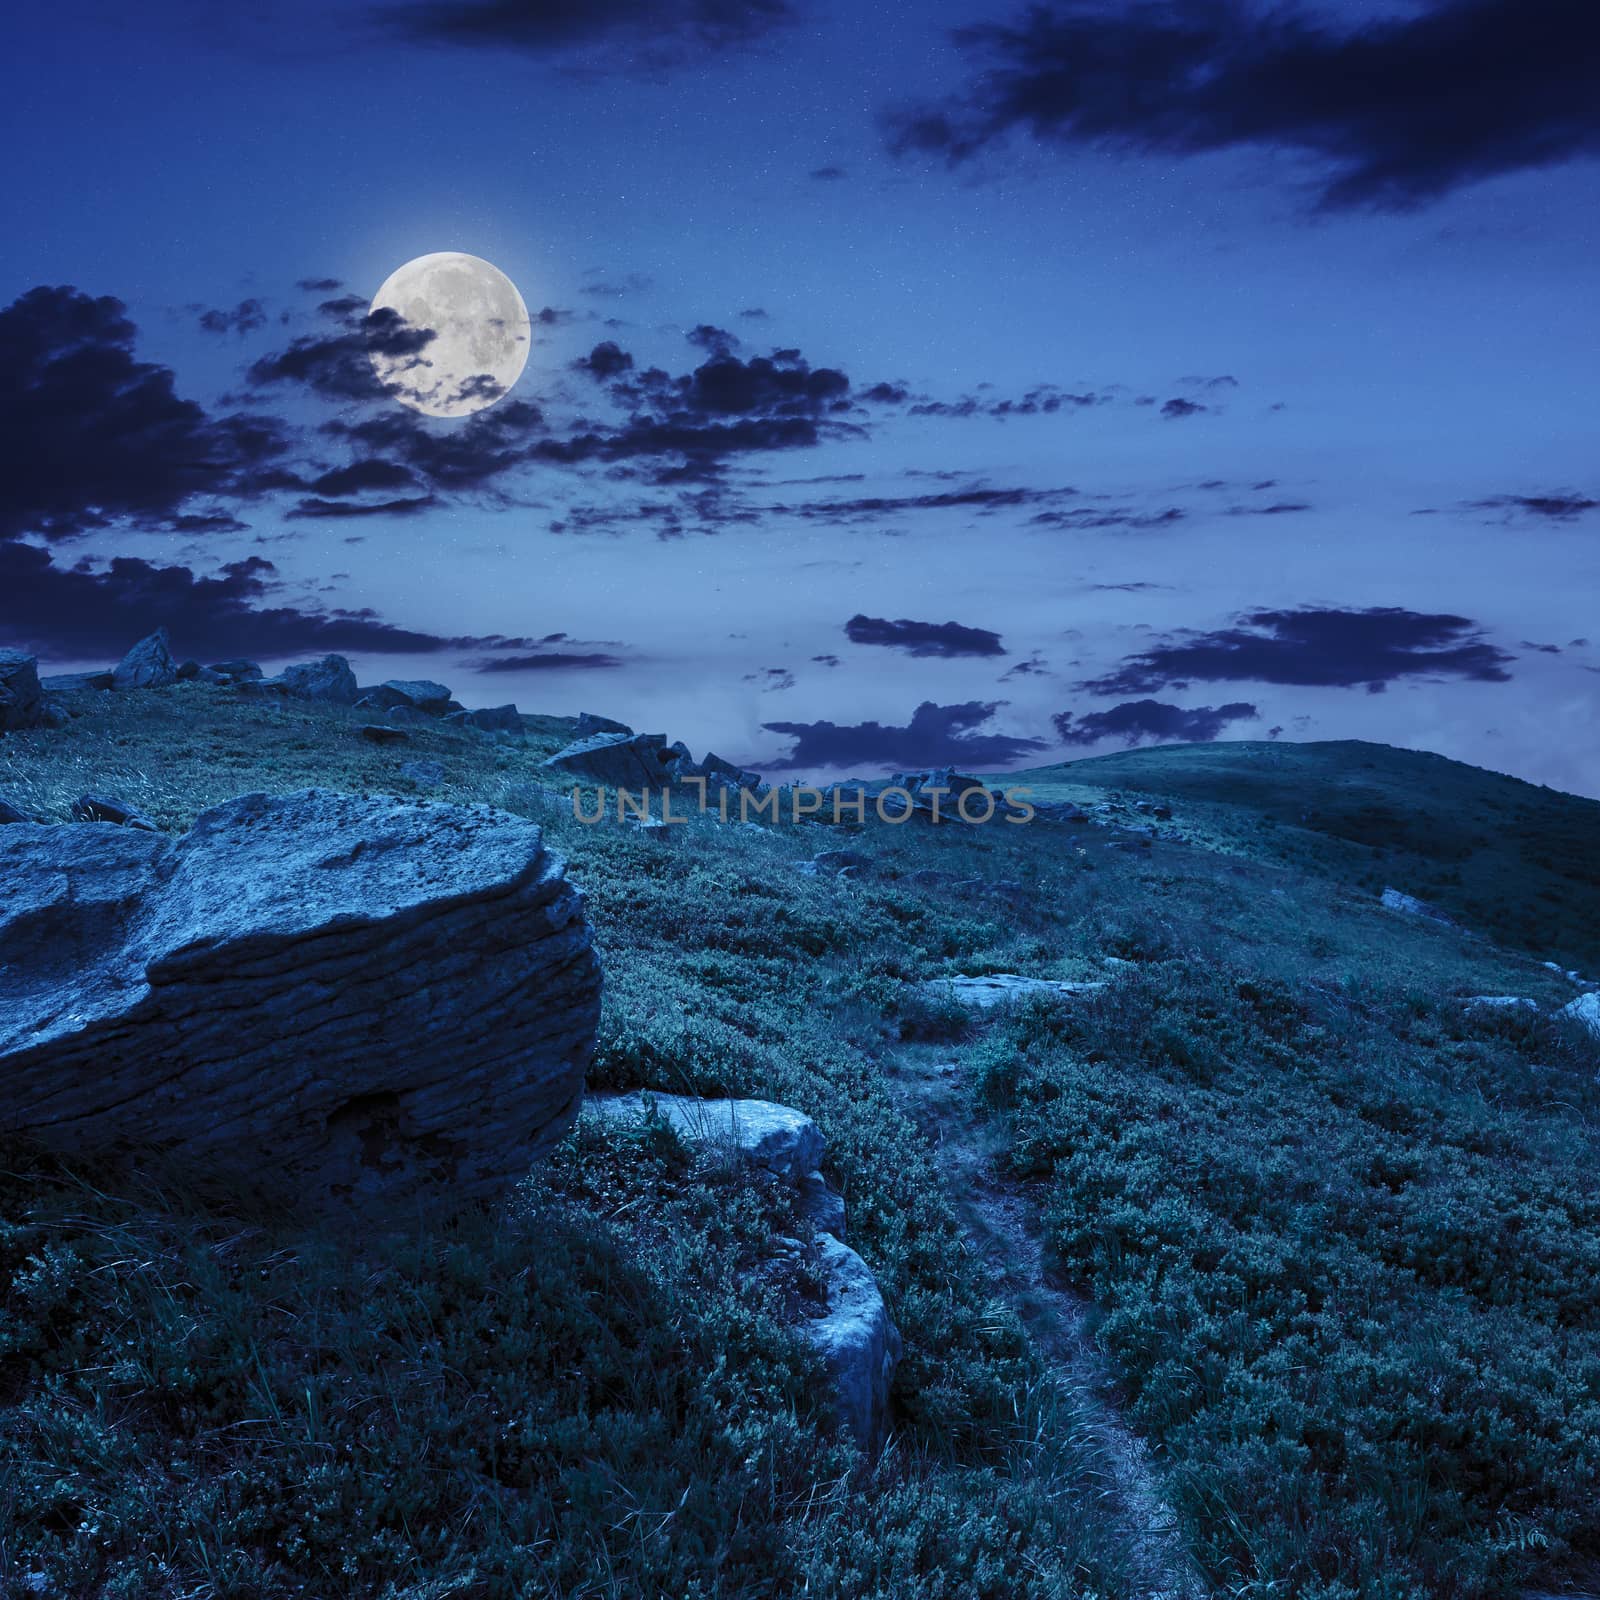 stones on the hillside at night by Pellinni